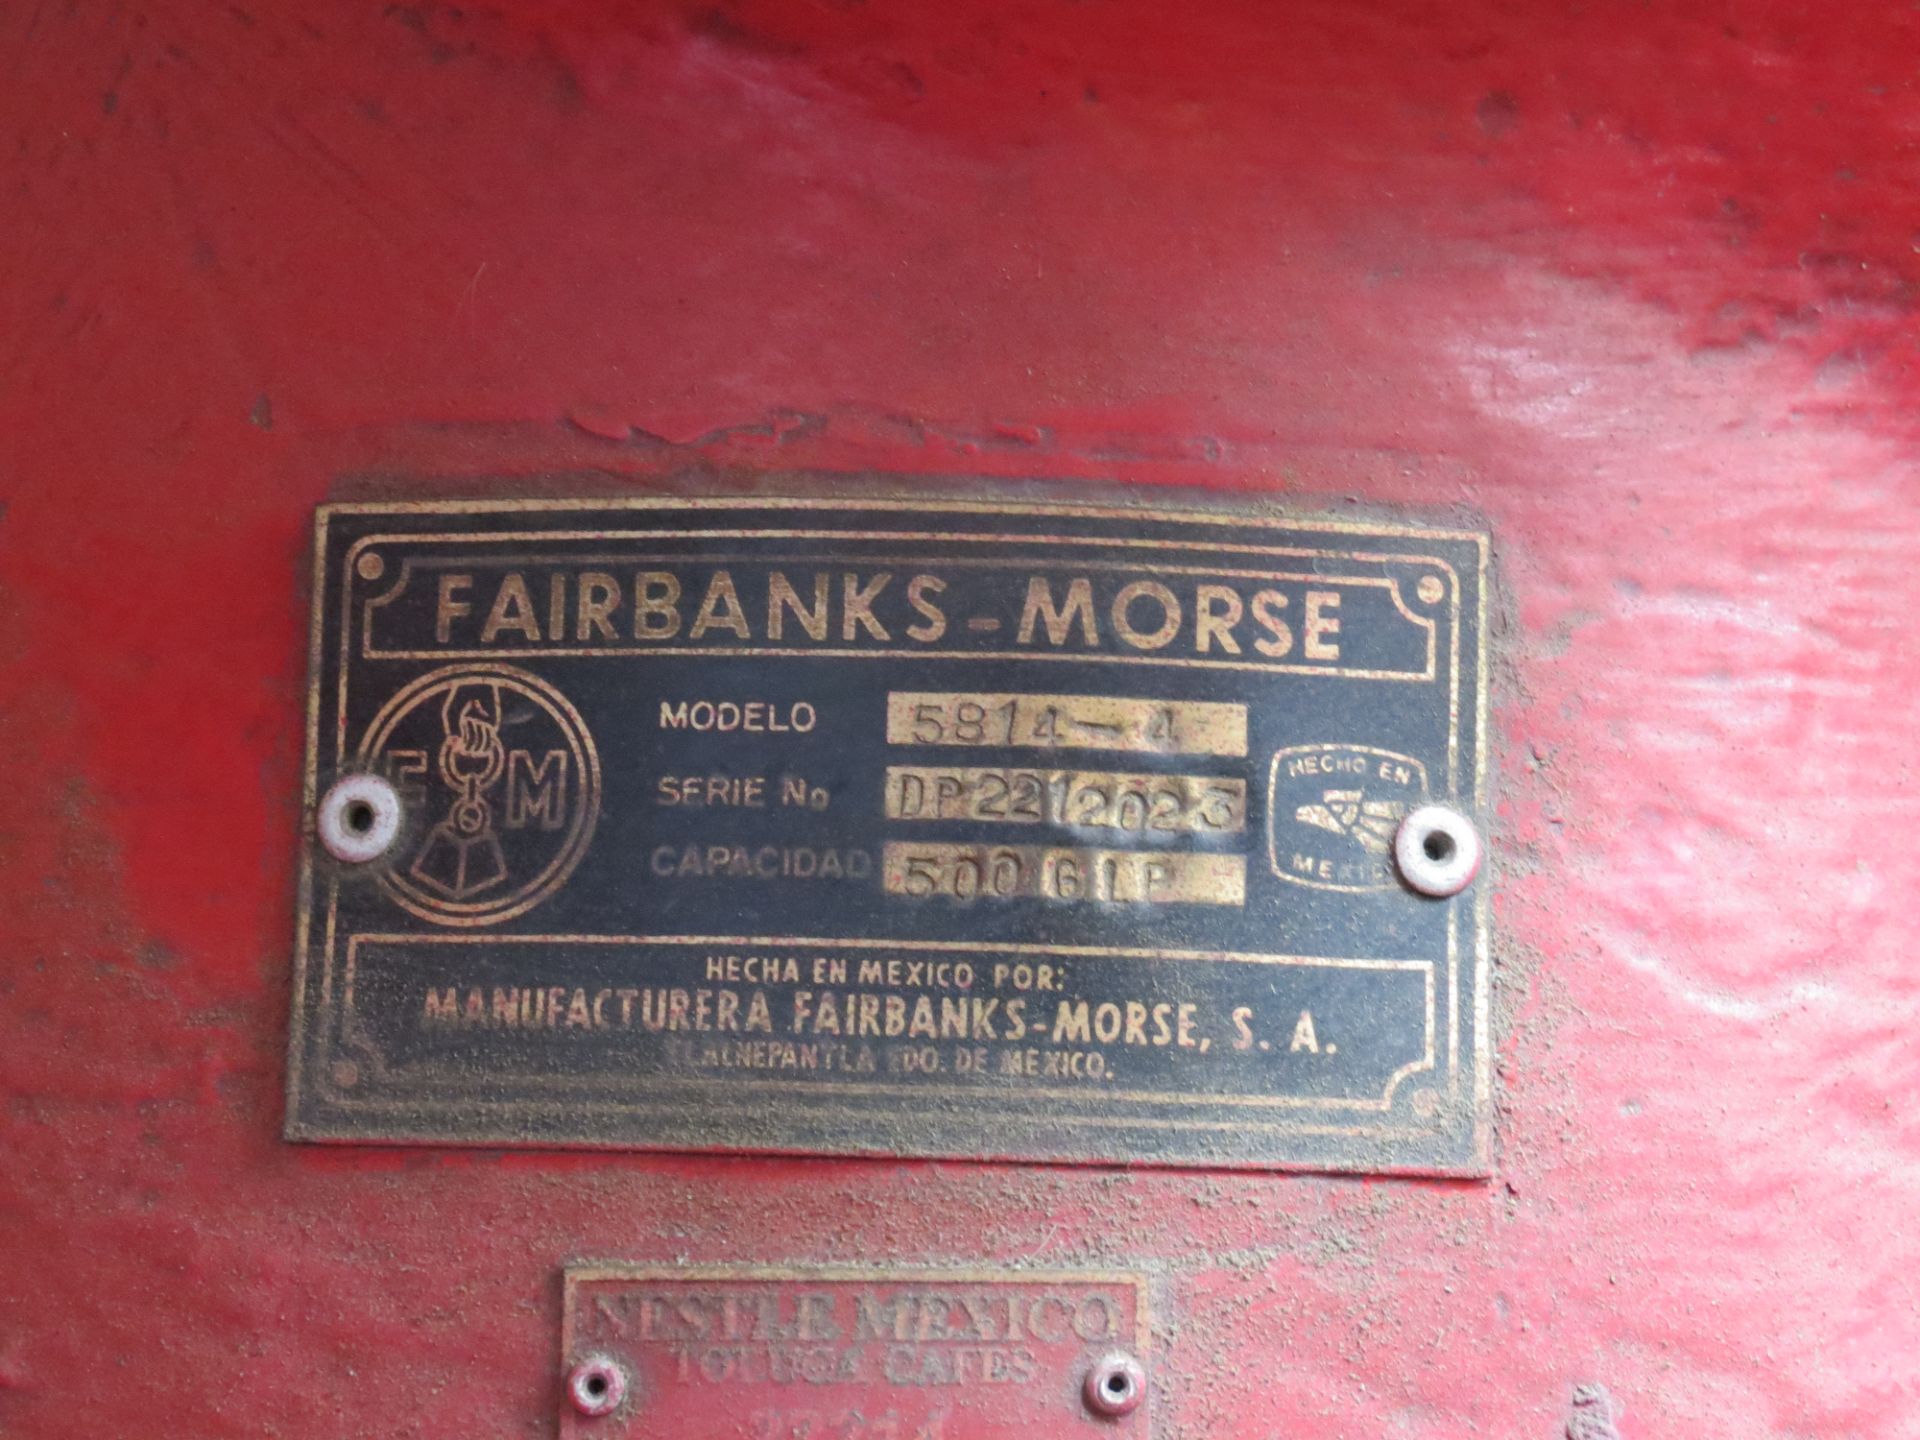 Fire Suppression System, includes Fairbanks Morse pump, model 5814-4 - Image 16 of 17